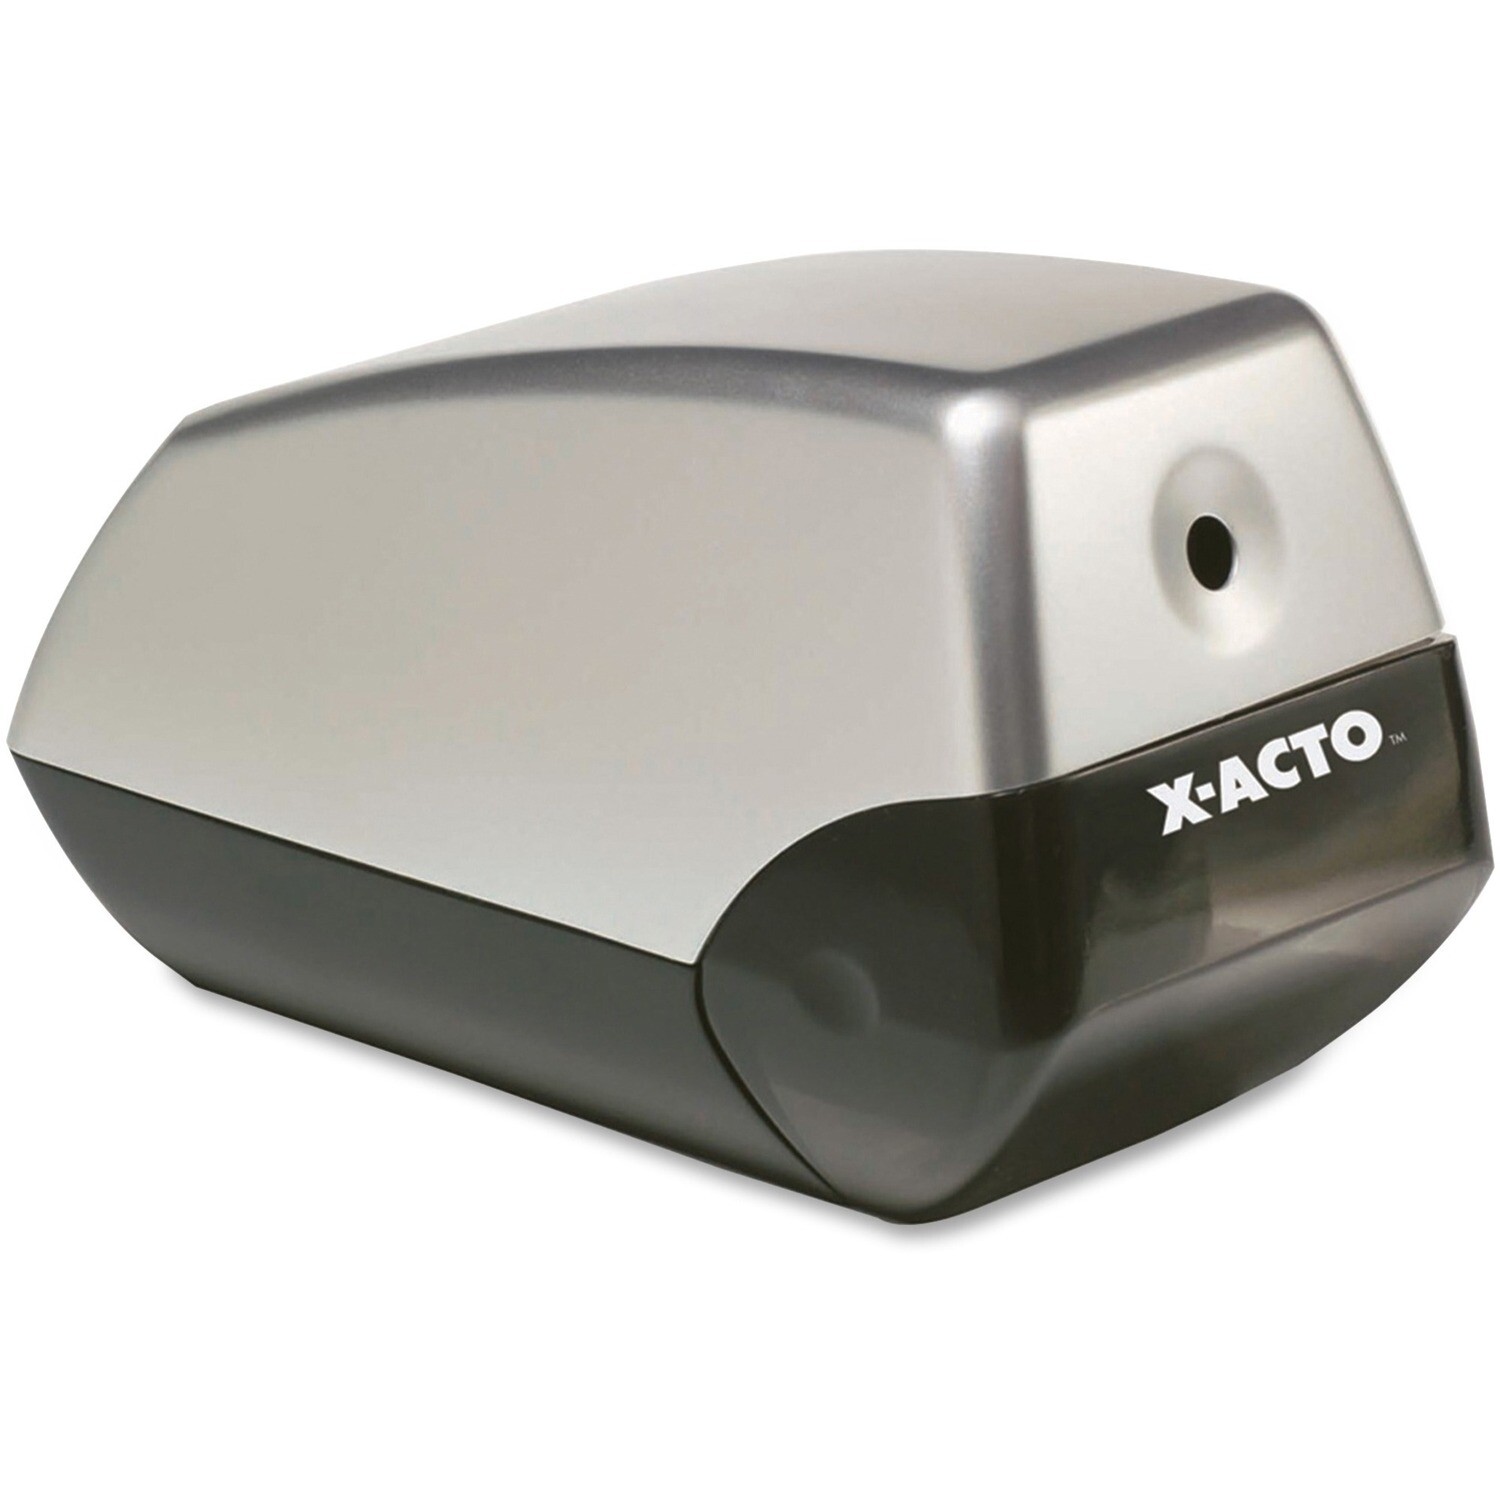 Sharpener, Electric, X-Acto Silver